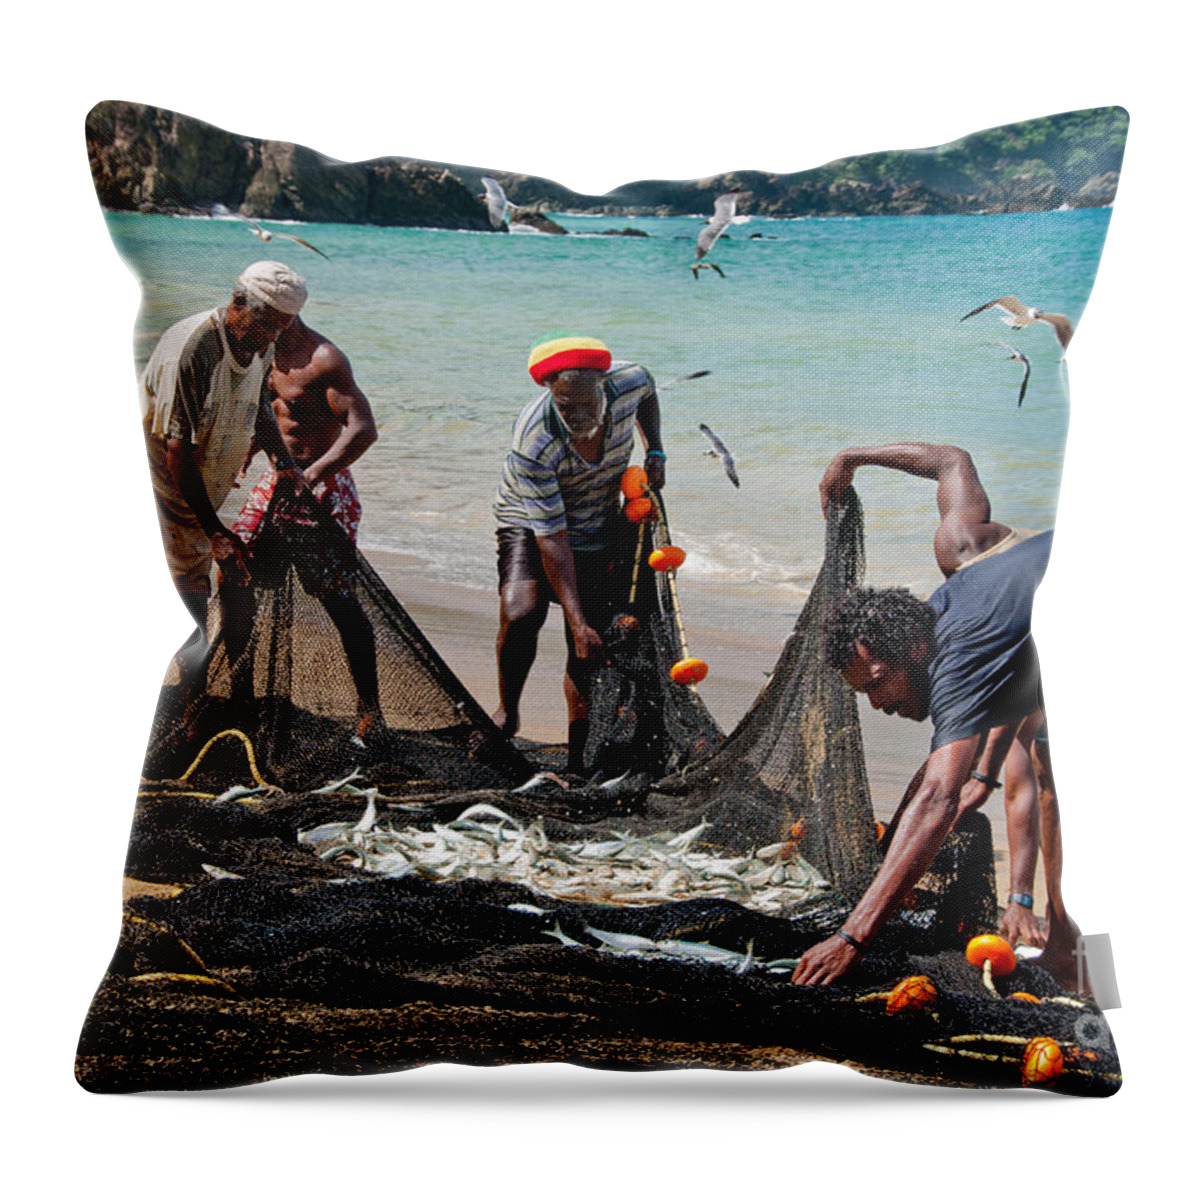 Castara Throw Pillow featuring the photograph Pulling Seine 2 by Marion Galt